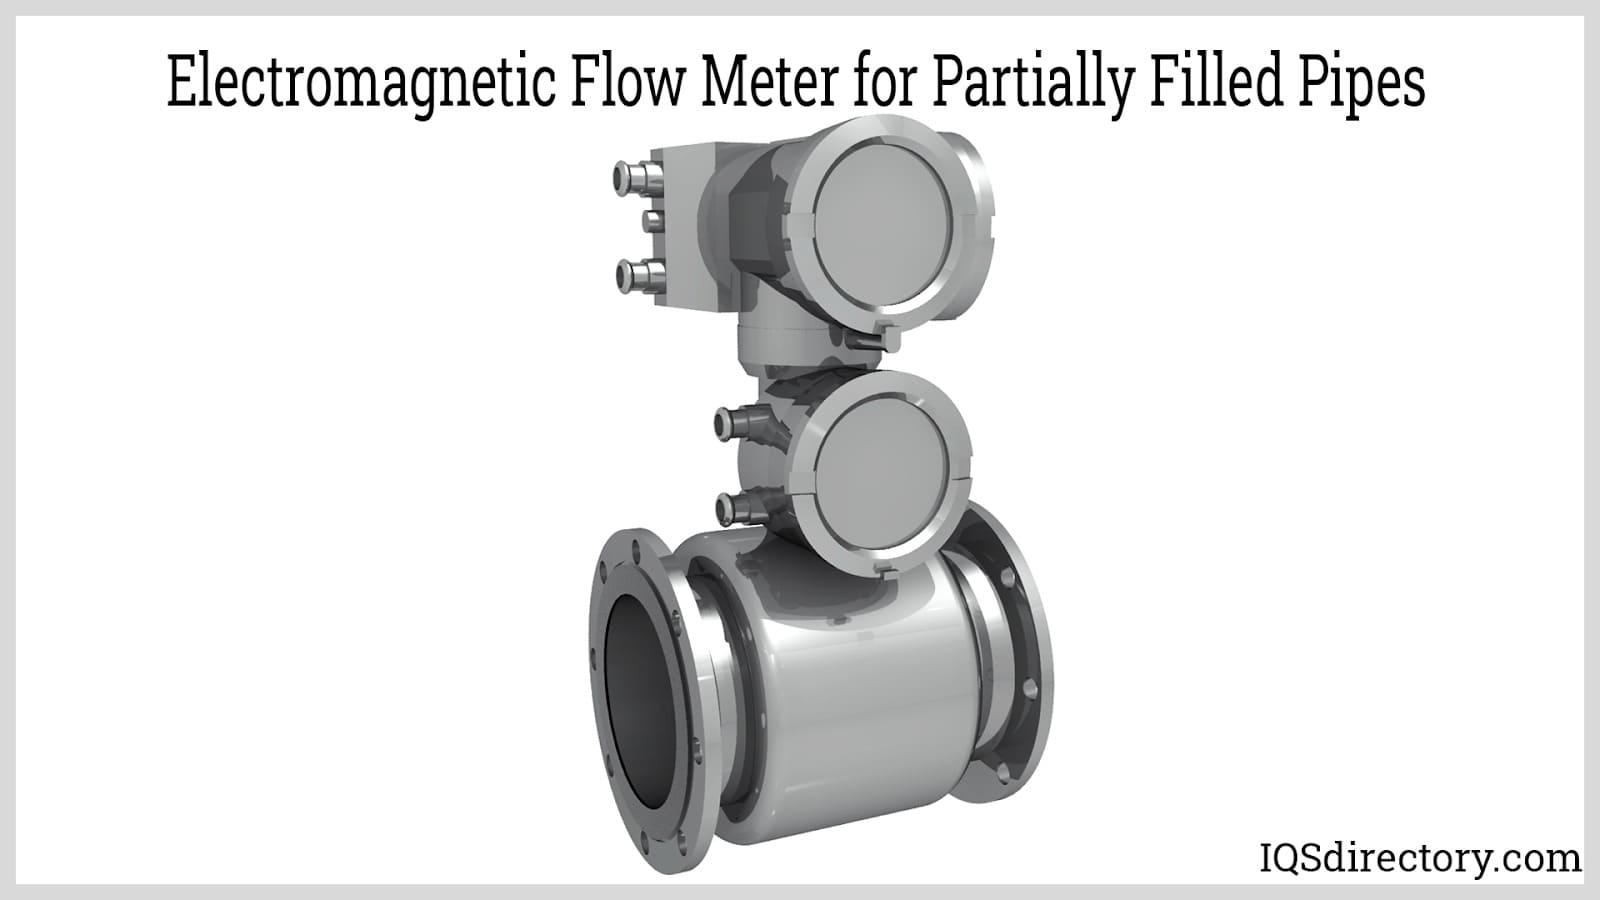 Electromagnetic Flow Meter for Partially Filled Pipes